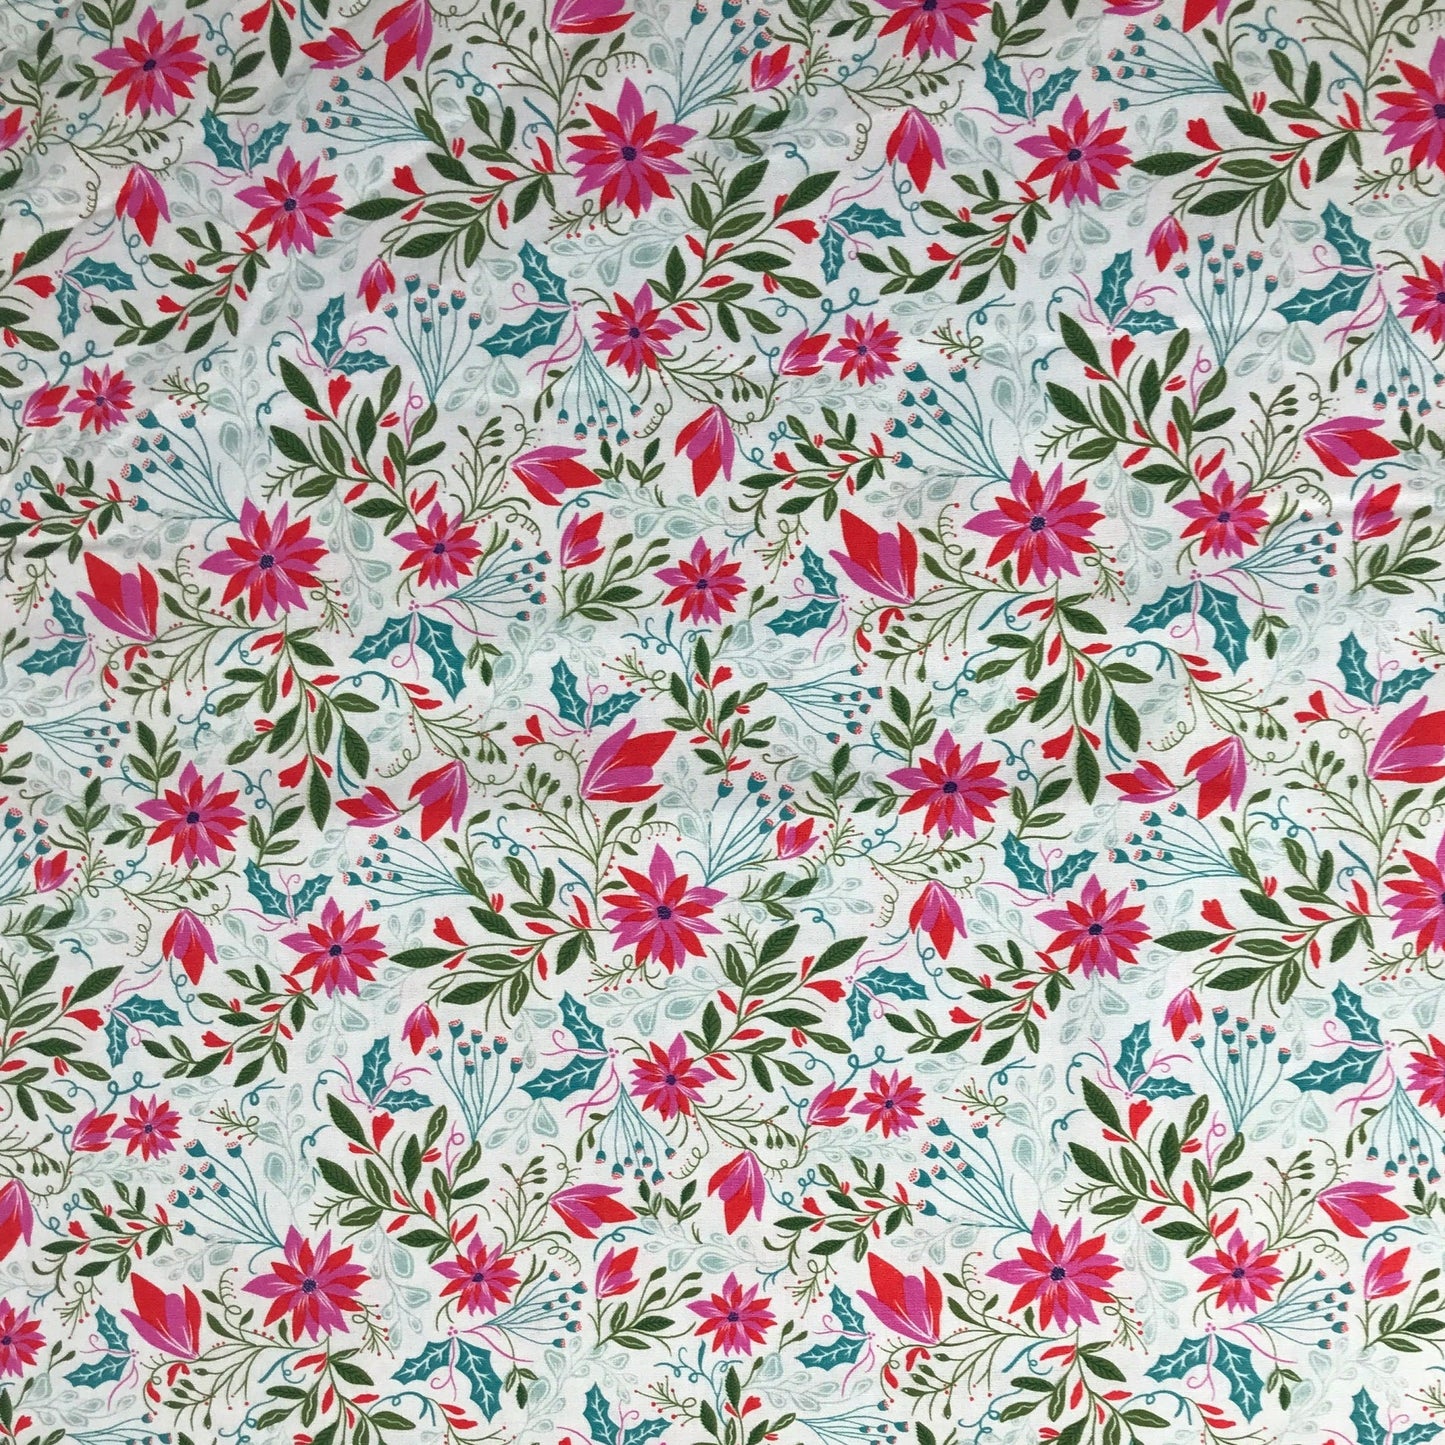 Winter Floral Jolly Robins Beth Salt The Craft Cotton Co Quilters Cotton Fabric Fetish